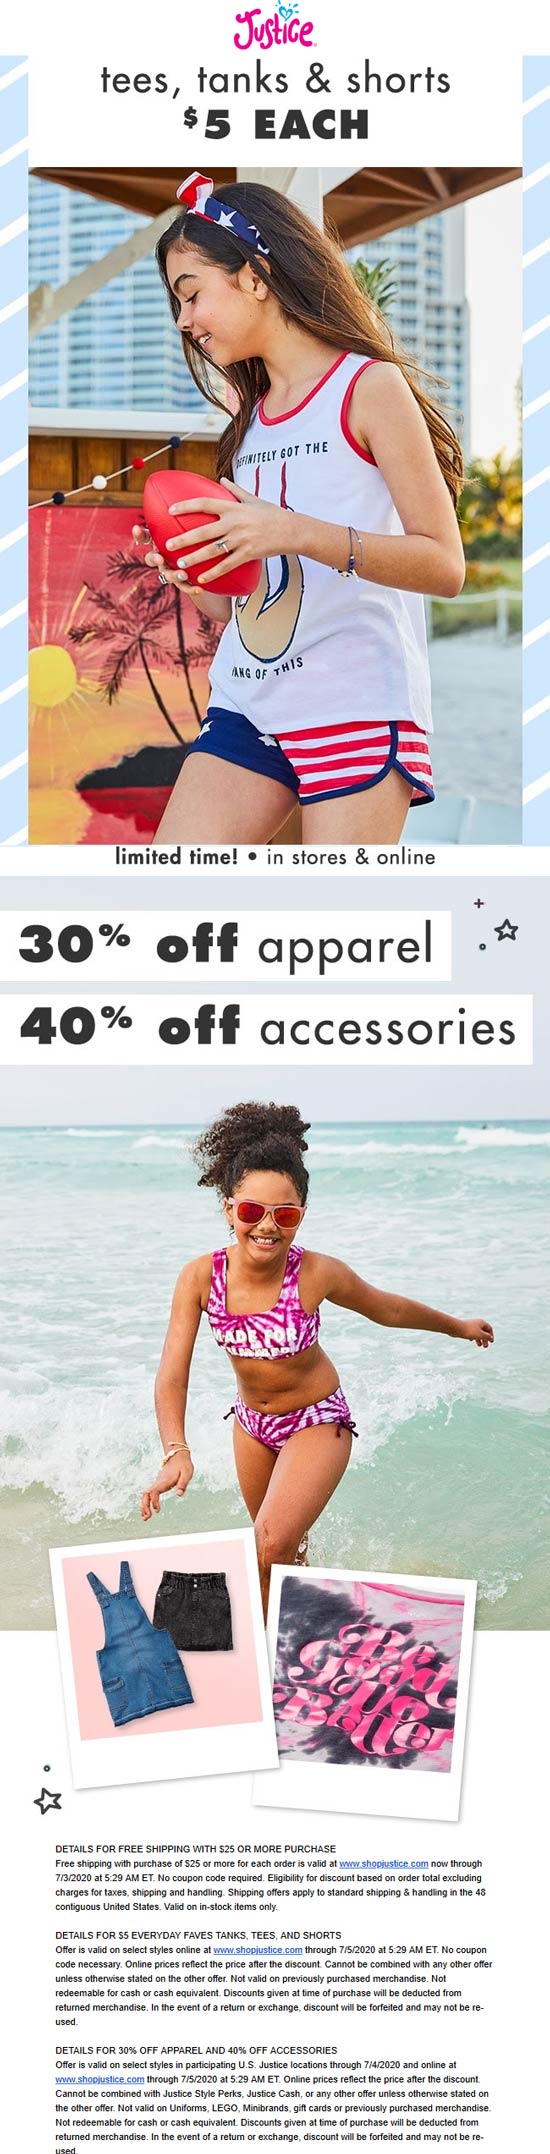 Justice stores Coupon  30% off apparel & 40% off accessories at Justice, ditto online #justice